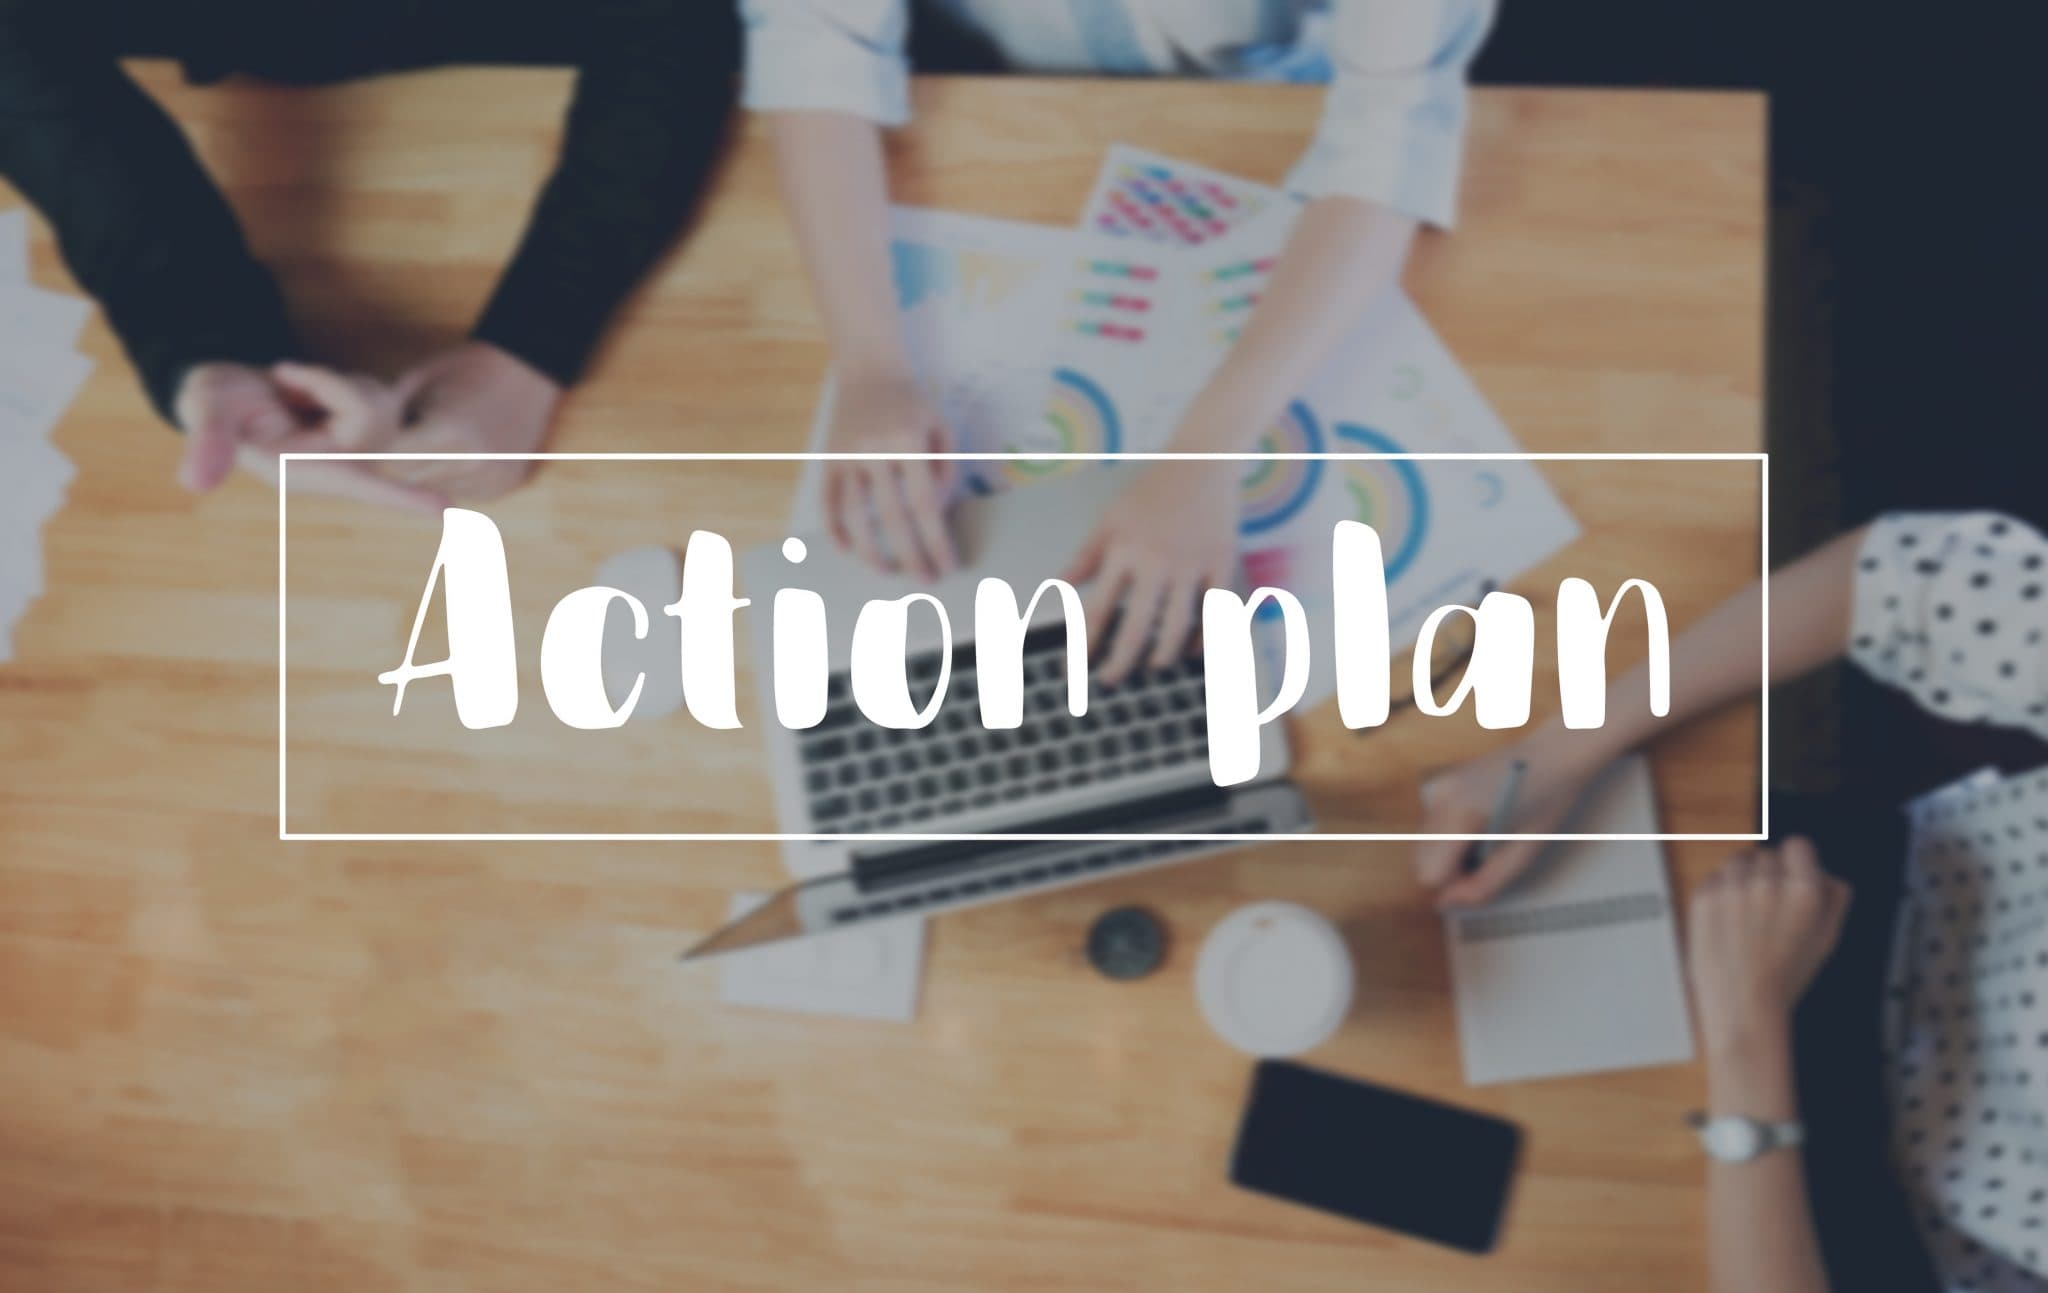 Cover picture for the action plan message showing people sitting at a table